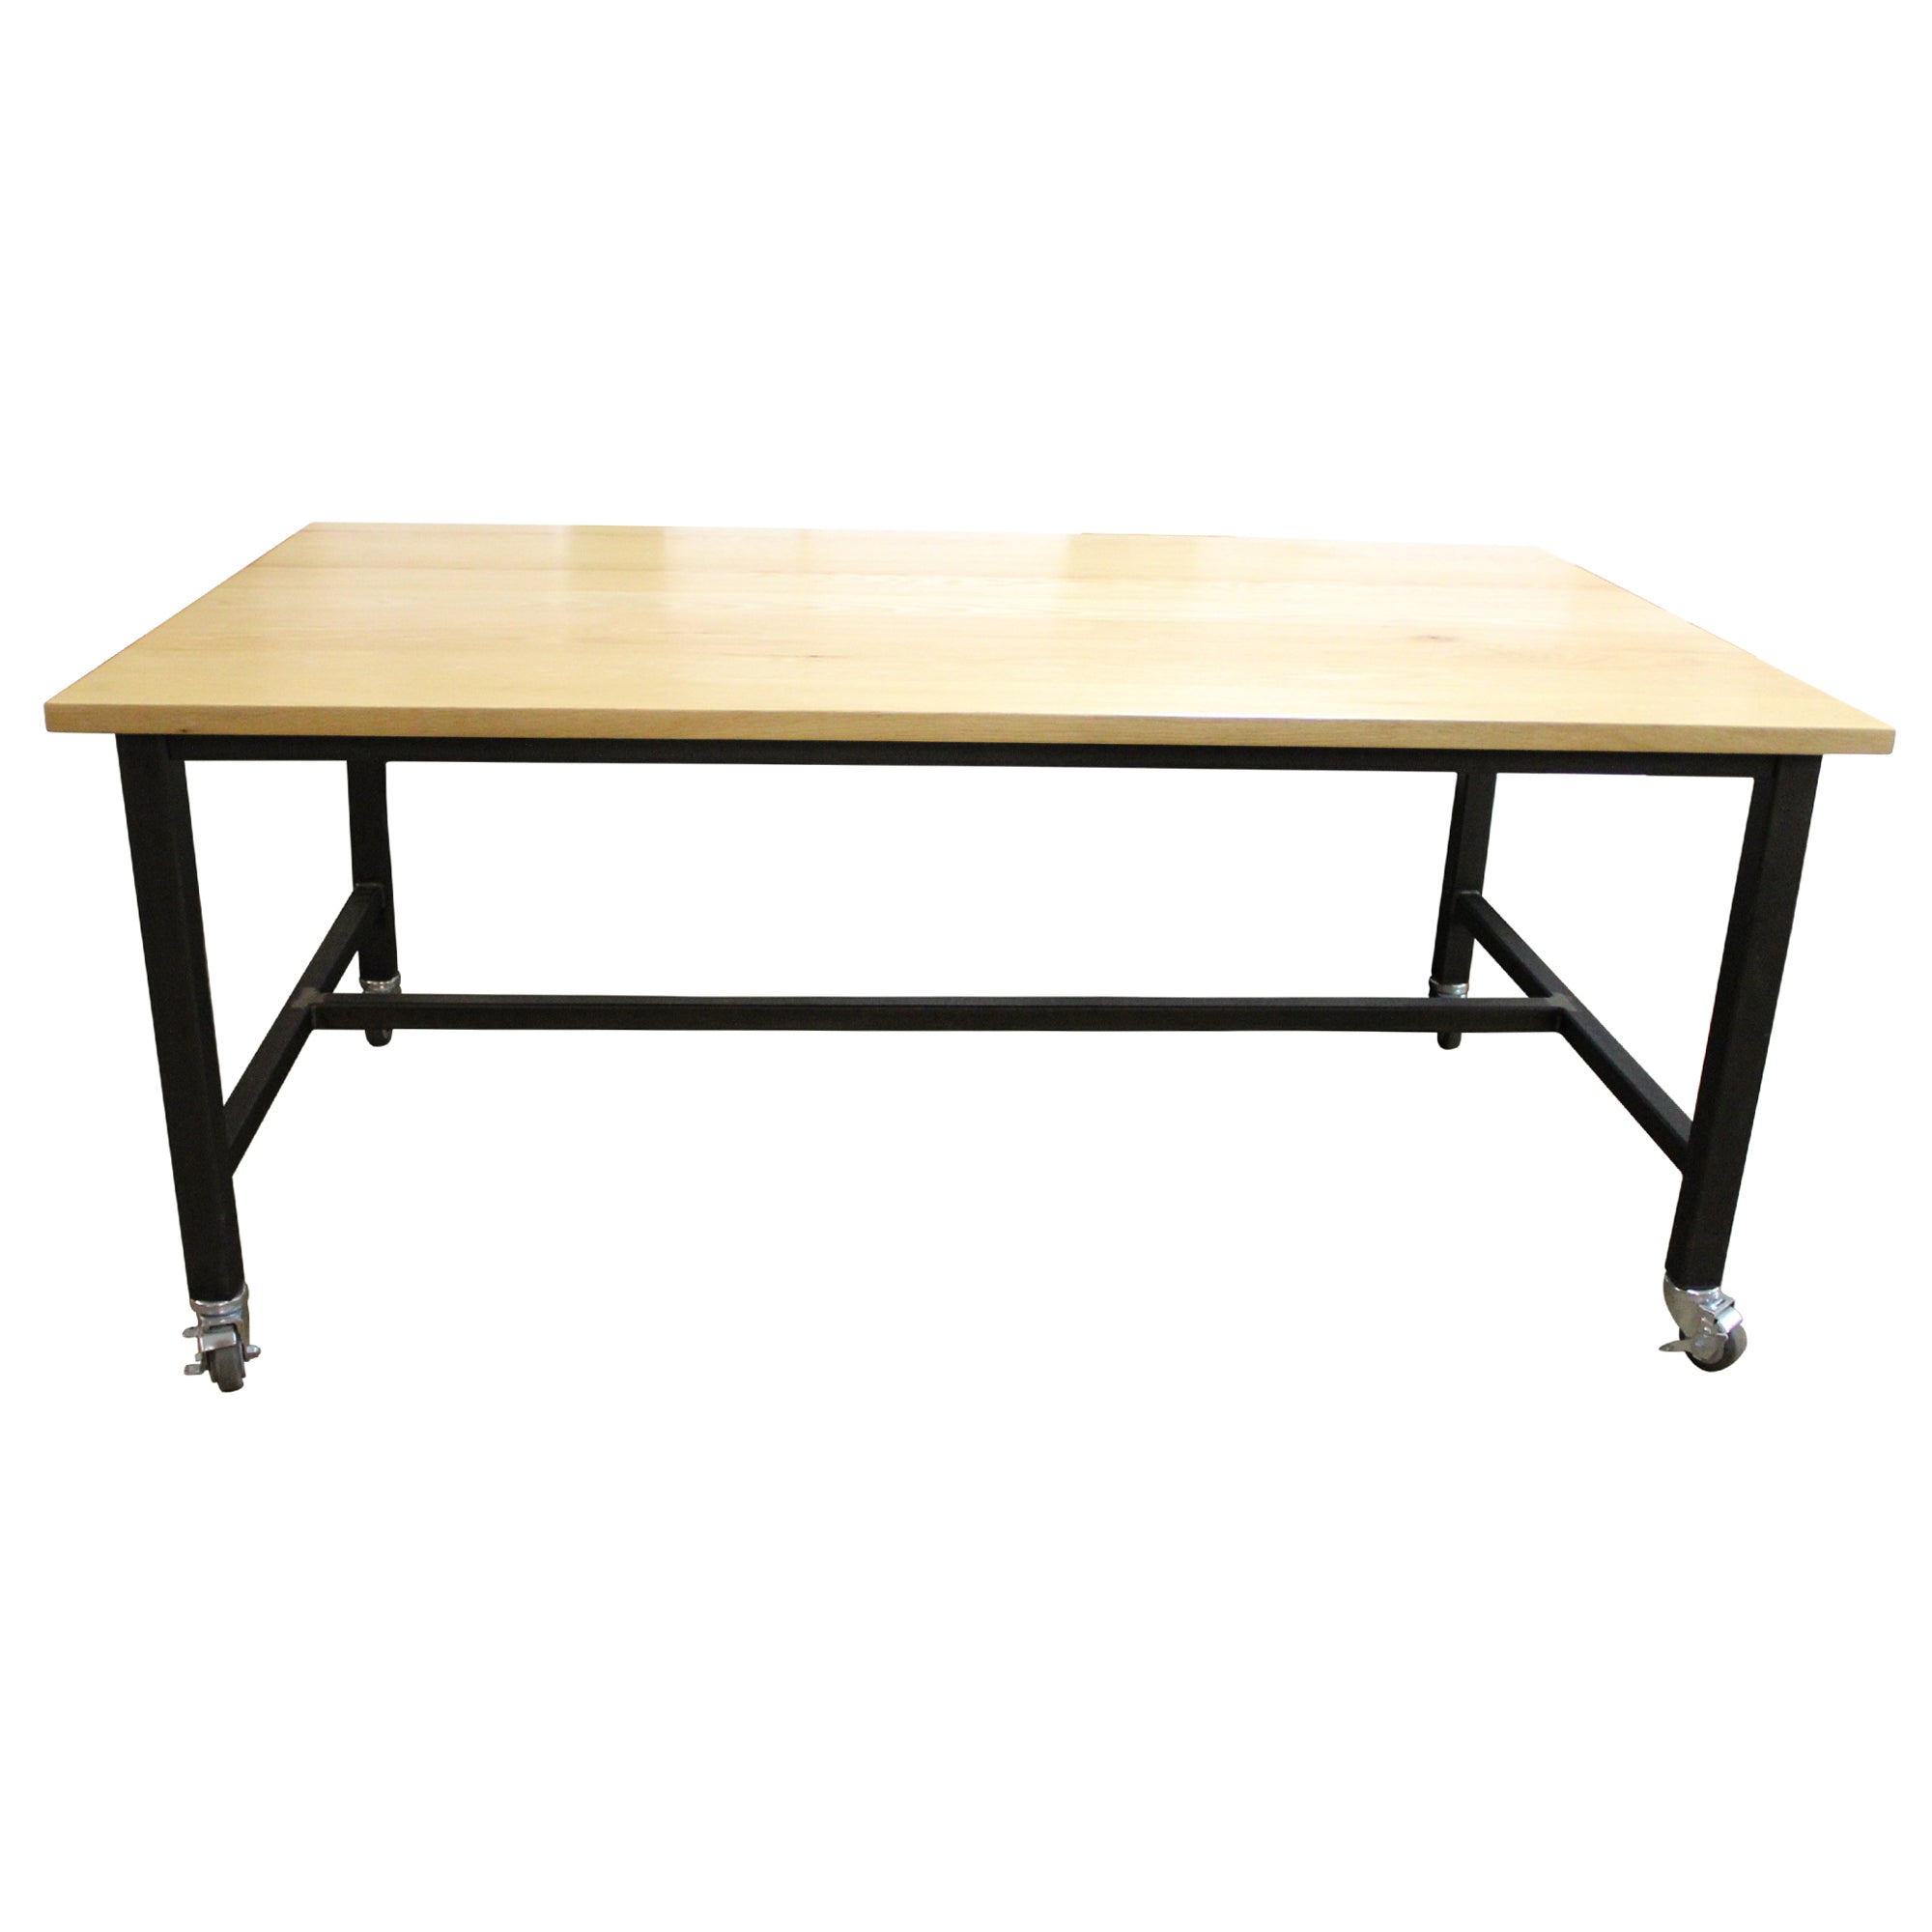 Industrial Collaboration Table w/ Casters, Maple - Preowned